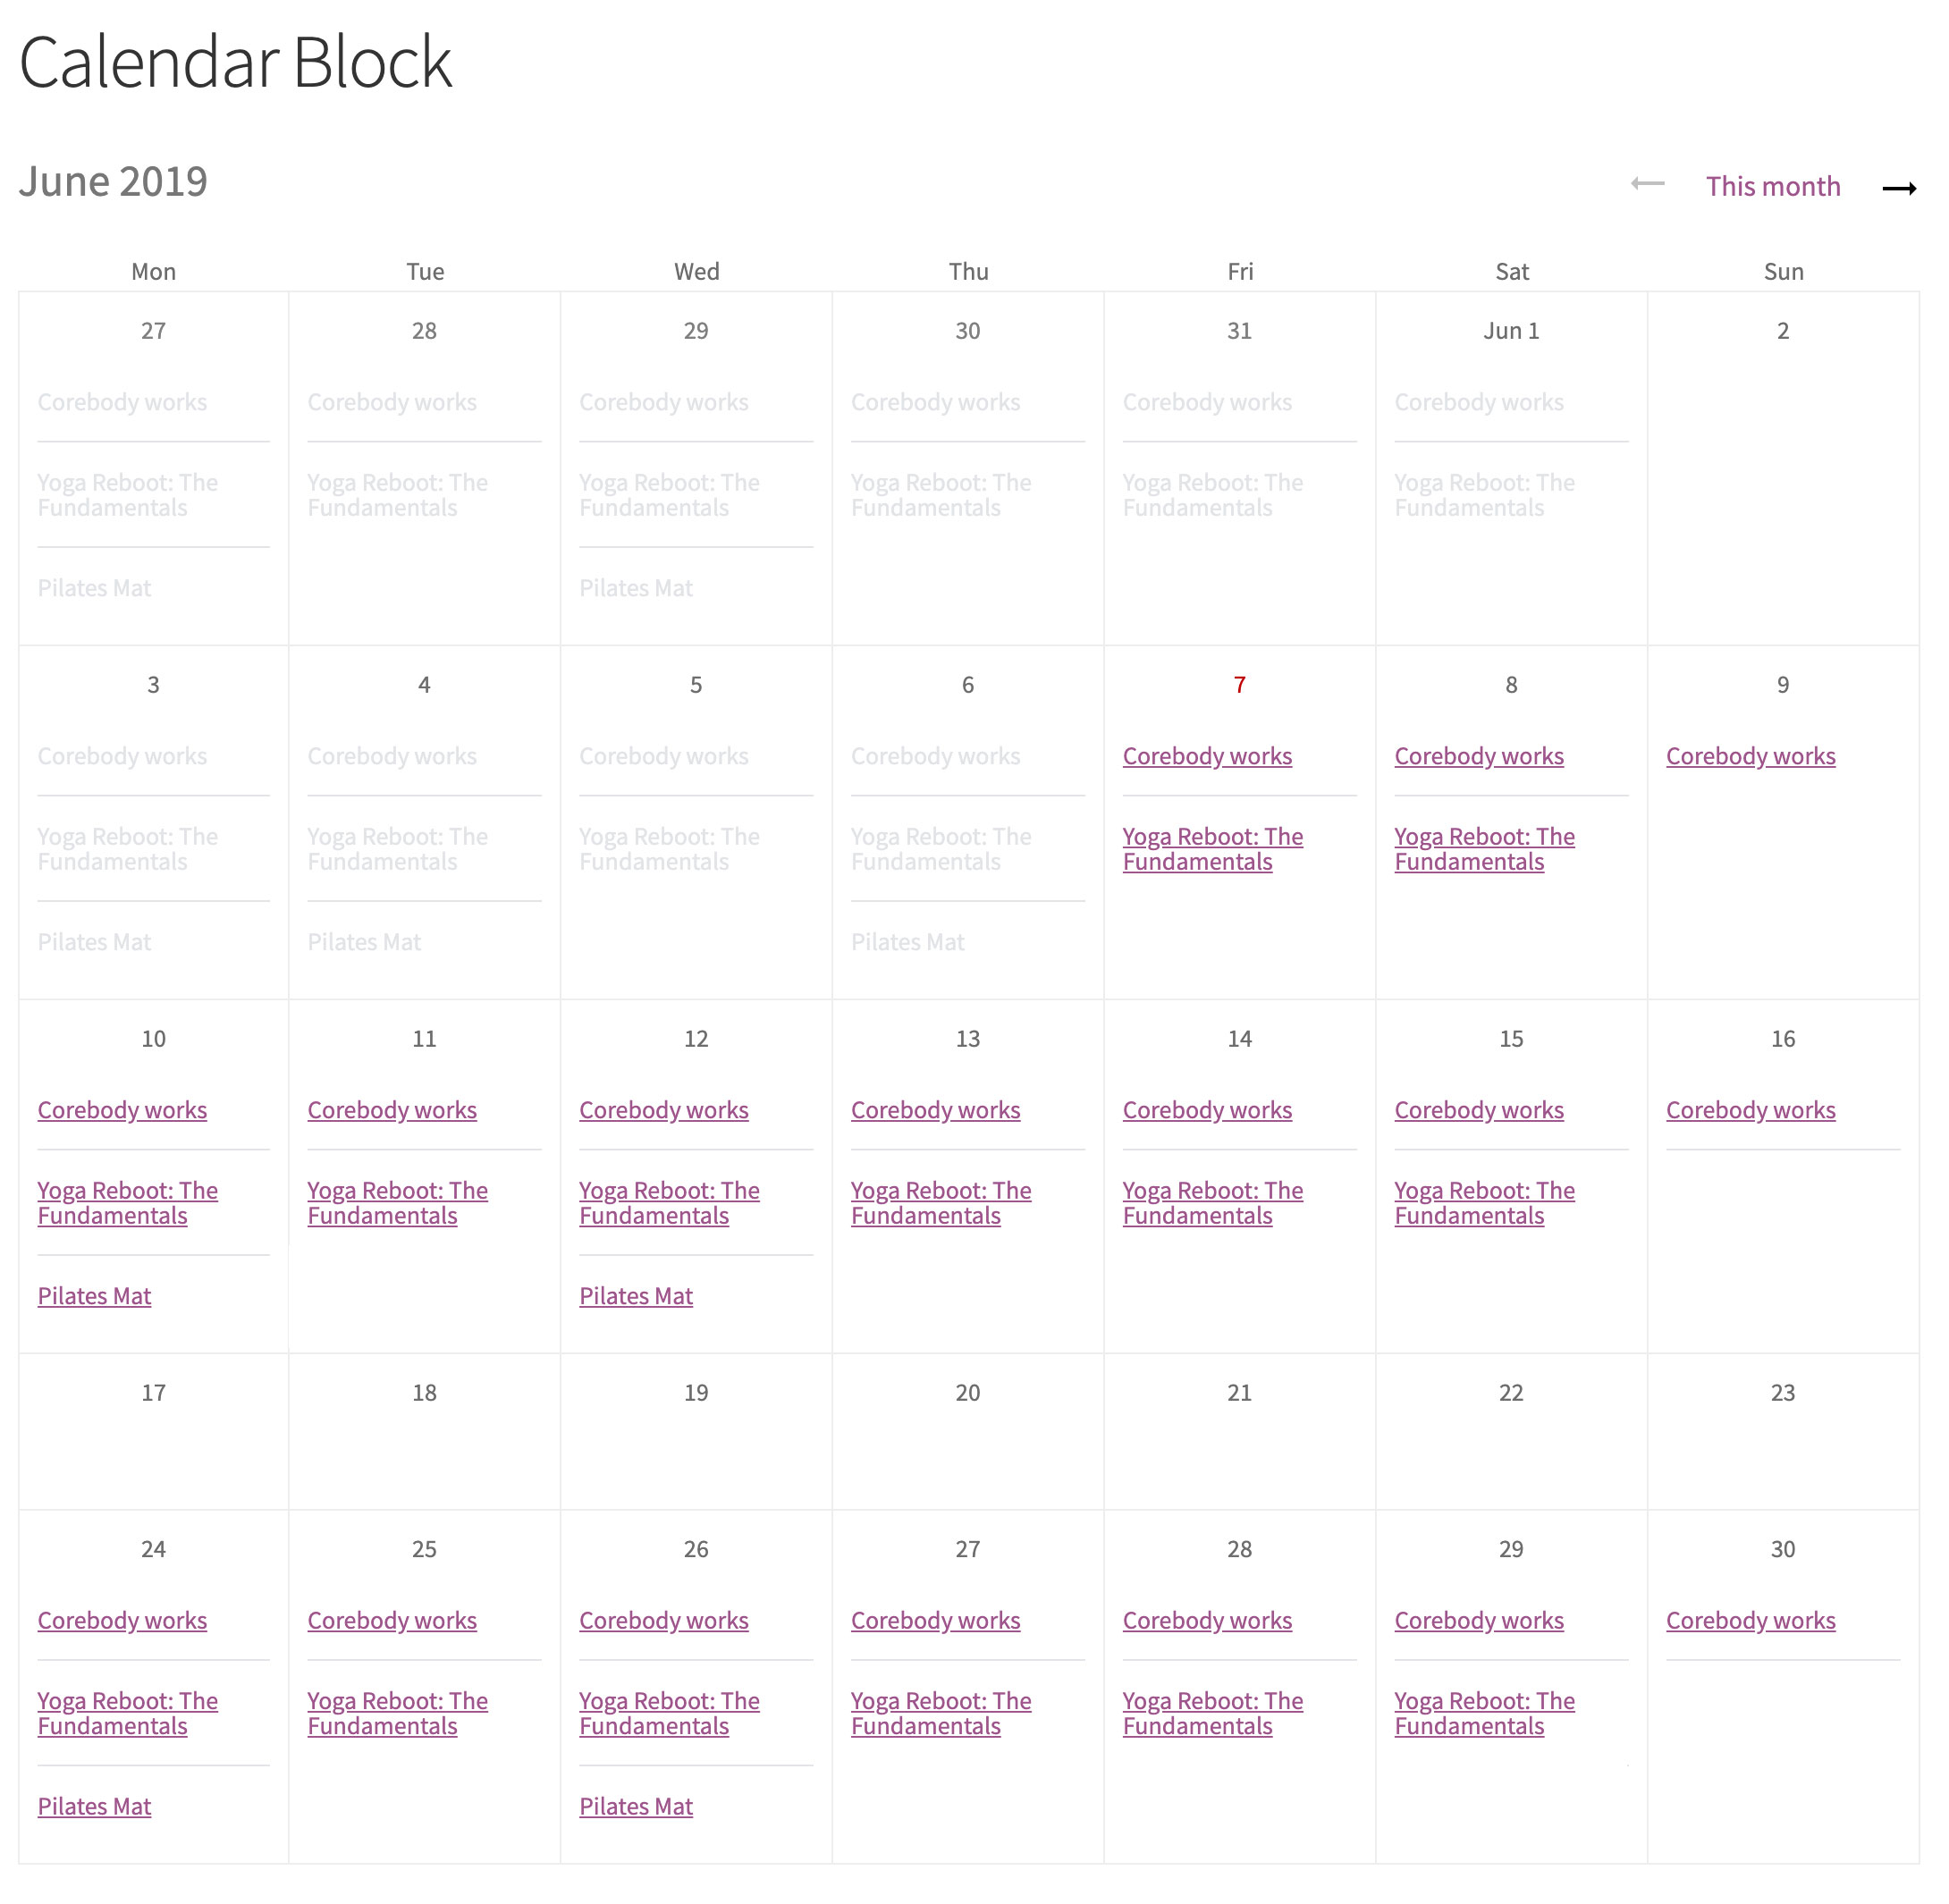 Display product availability for a given month in a calendar that allows customers to add directly to cart.